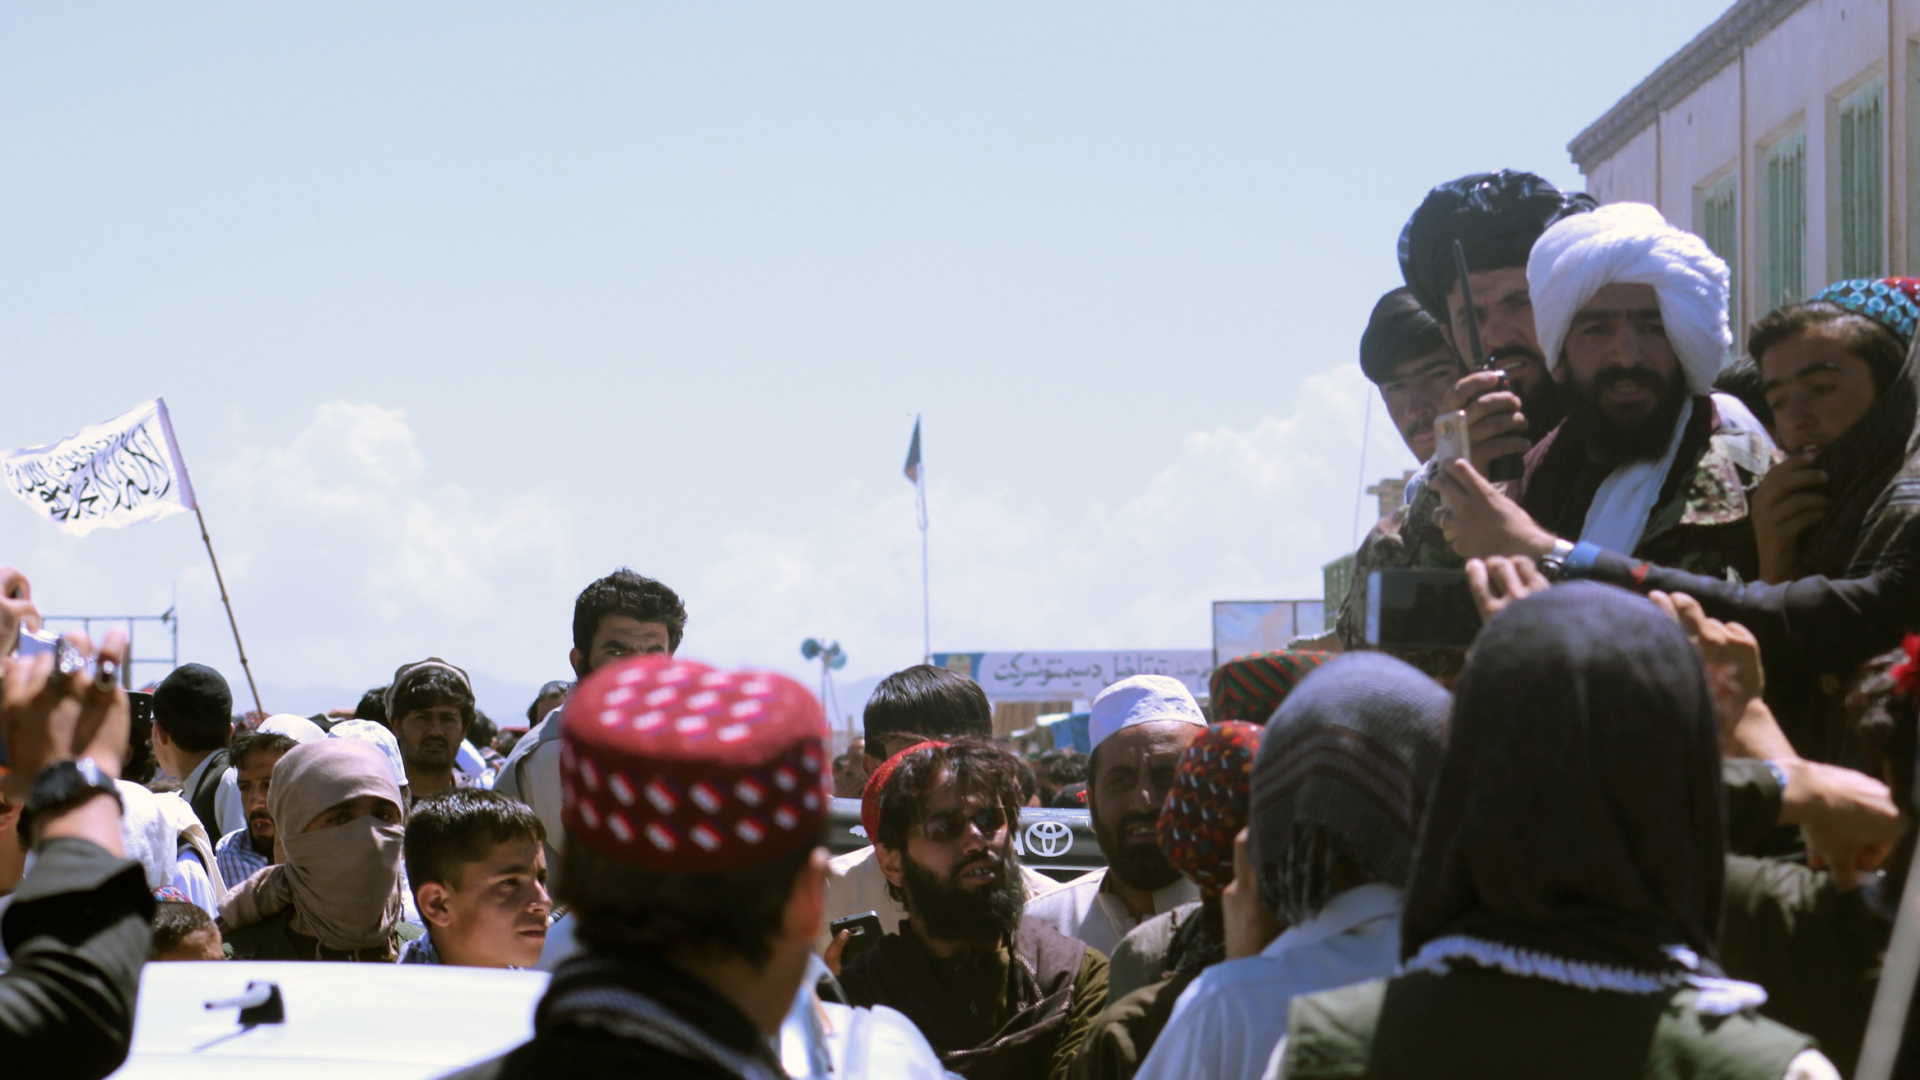 epa06812876 Alleged Taliban militants meets Afghan people as a group of Taliban visits to greet people, as a goodwill gesture amid a three-day ceasefire on second day of Eid al-Fitr, in Paktia, Afghanistan, 16 June 2018. Earlier in the month, President Ghani's government had announced a temporary ceasefire, starting on  12 June, to last until the end of the festival. The Taliban had followed suit a few days later and announced a three-day partial ceasefire during the festival.  EPA/STR